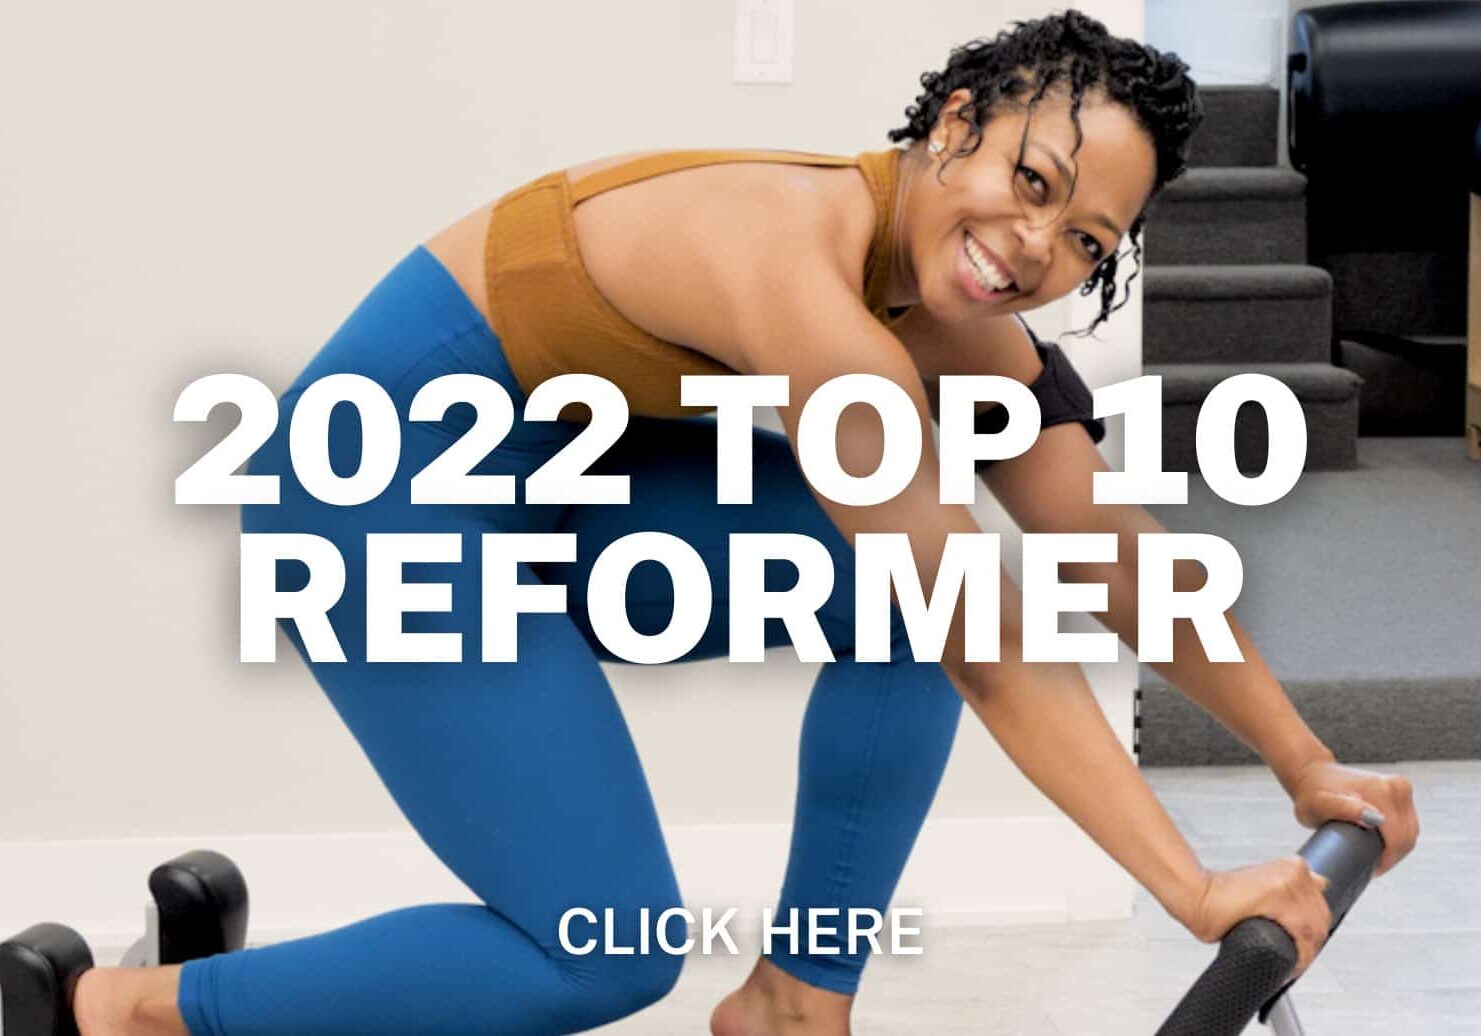 Click here for 2022 top 10 reformer workouts playlist